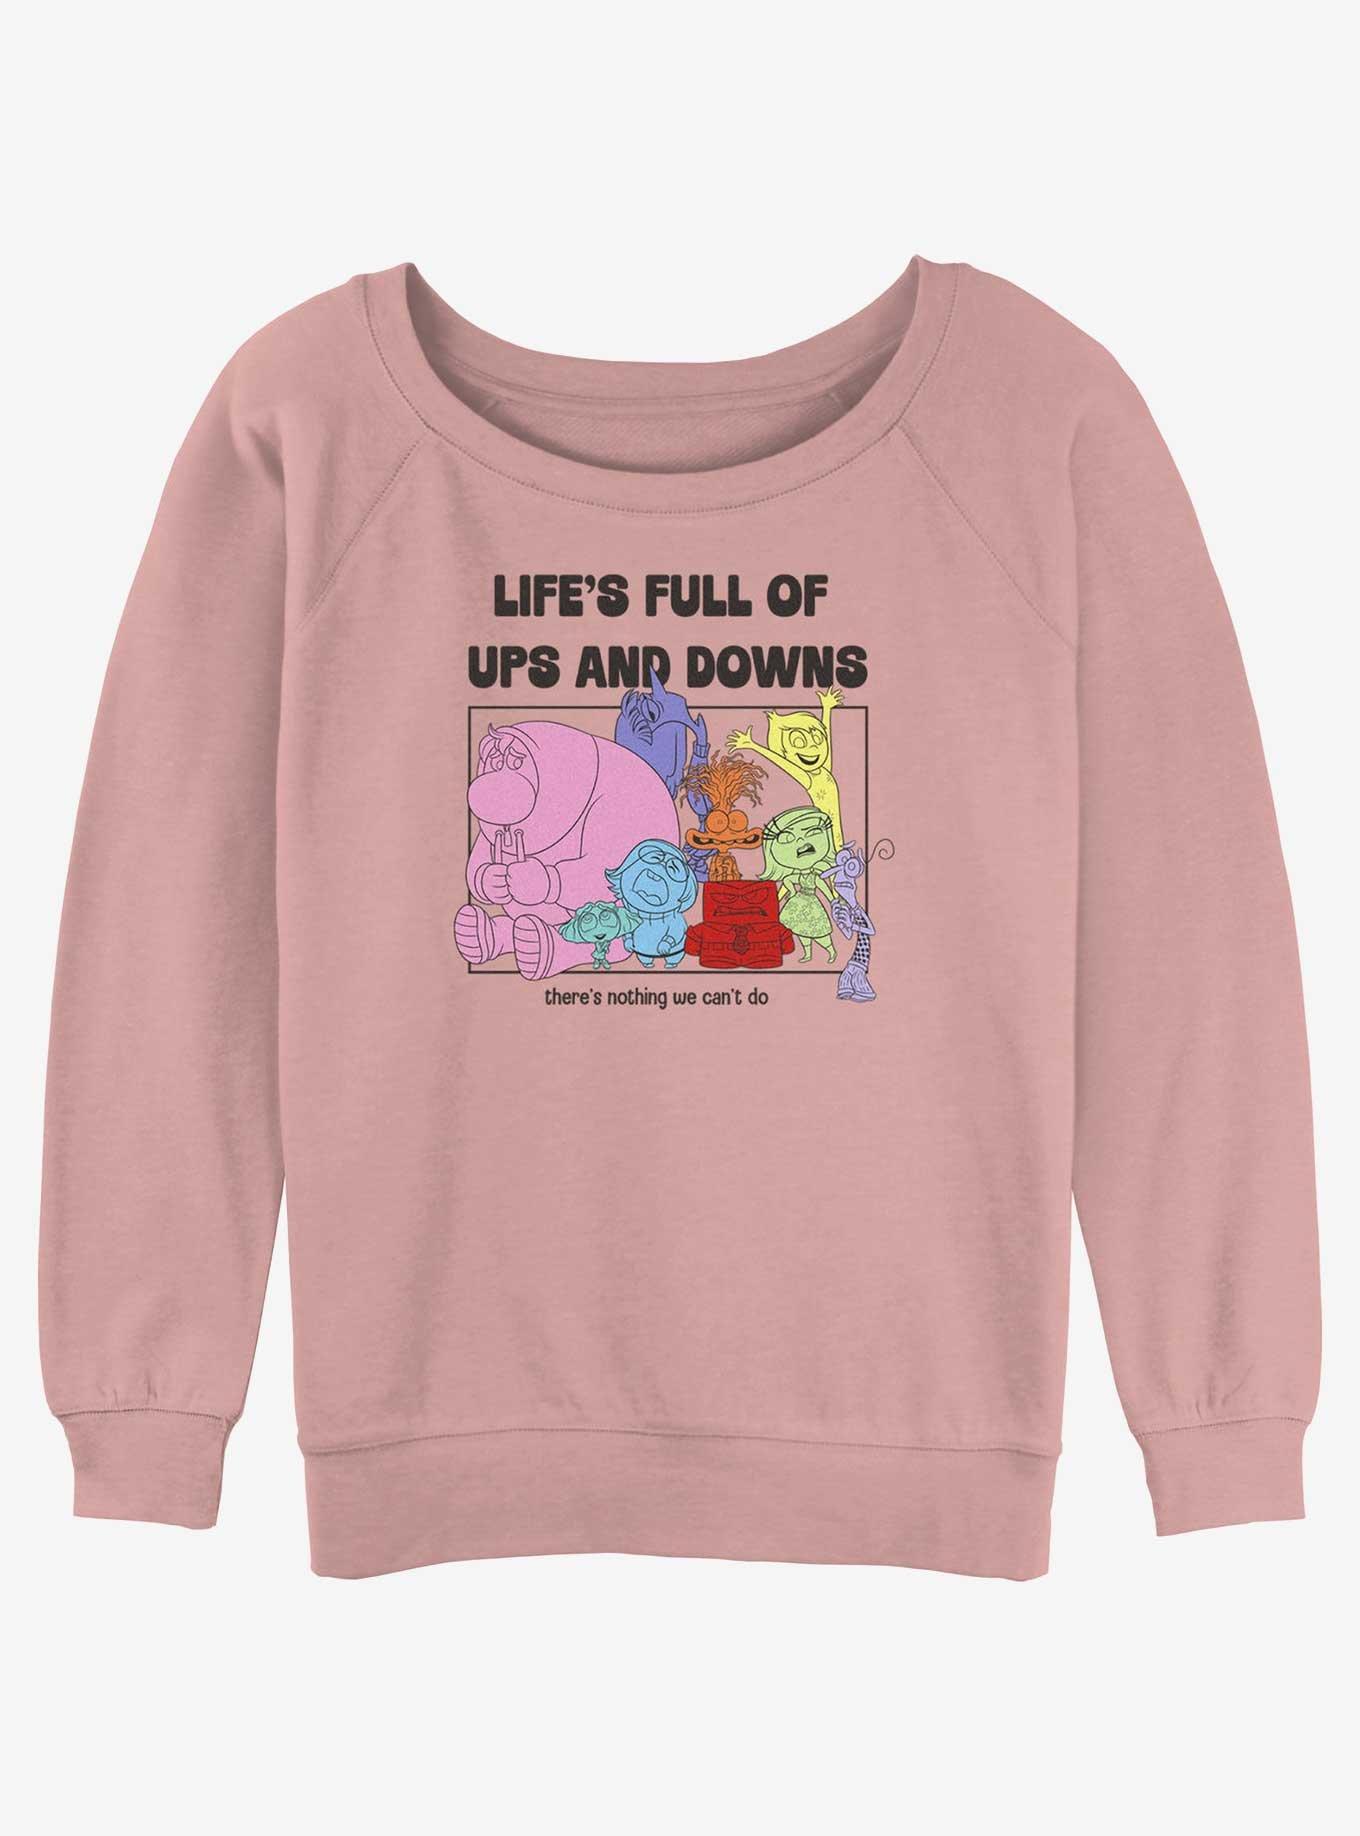 Disney Pixar Inside Out 2 Life's Full Of Ups And Downs Womens Slouchy Sweatshirt, DESERTPNK, hi-res